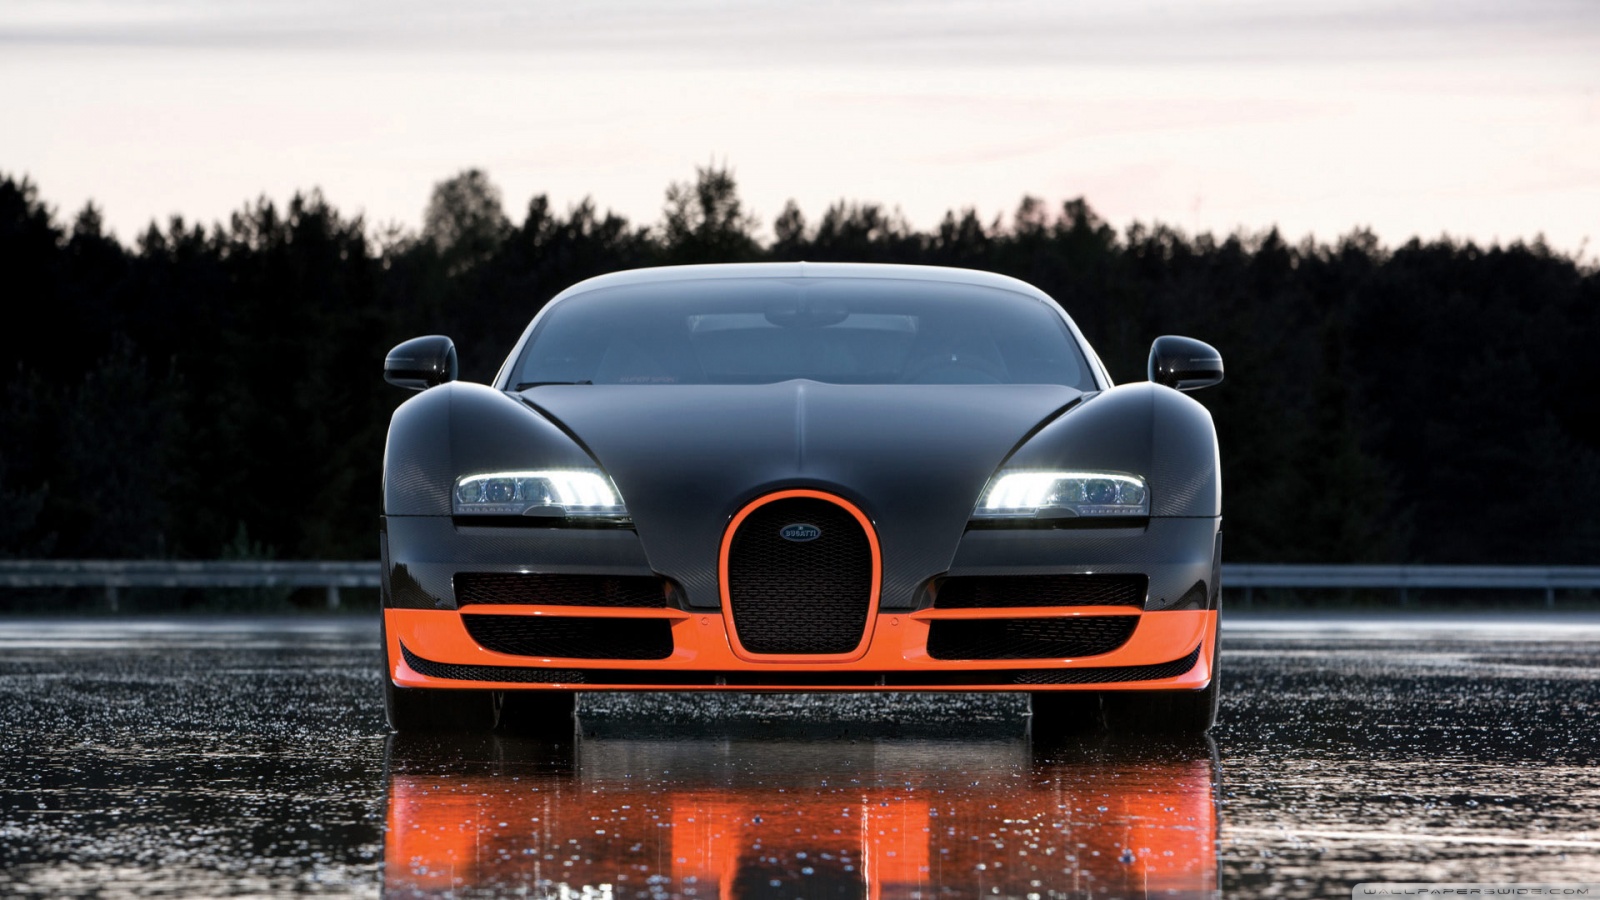 Bugatti Veyron Wallpaper HD For Laptop World Number One Cars